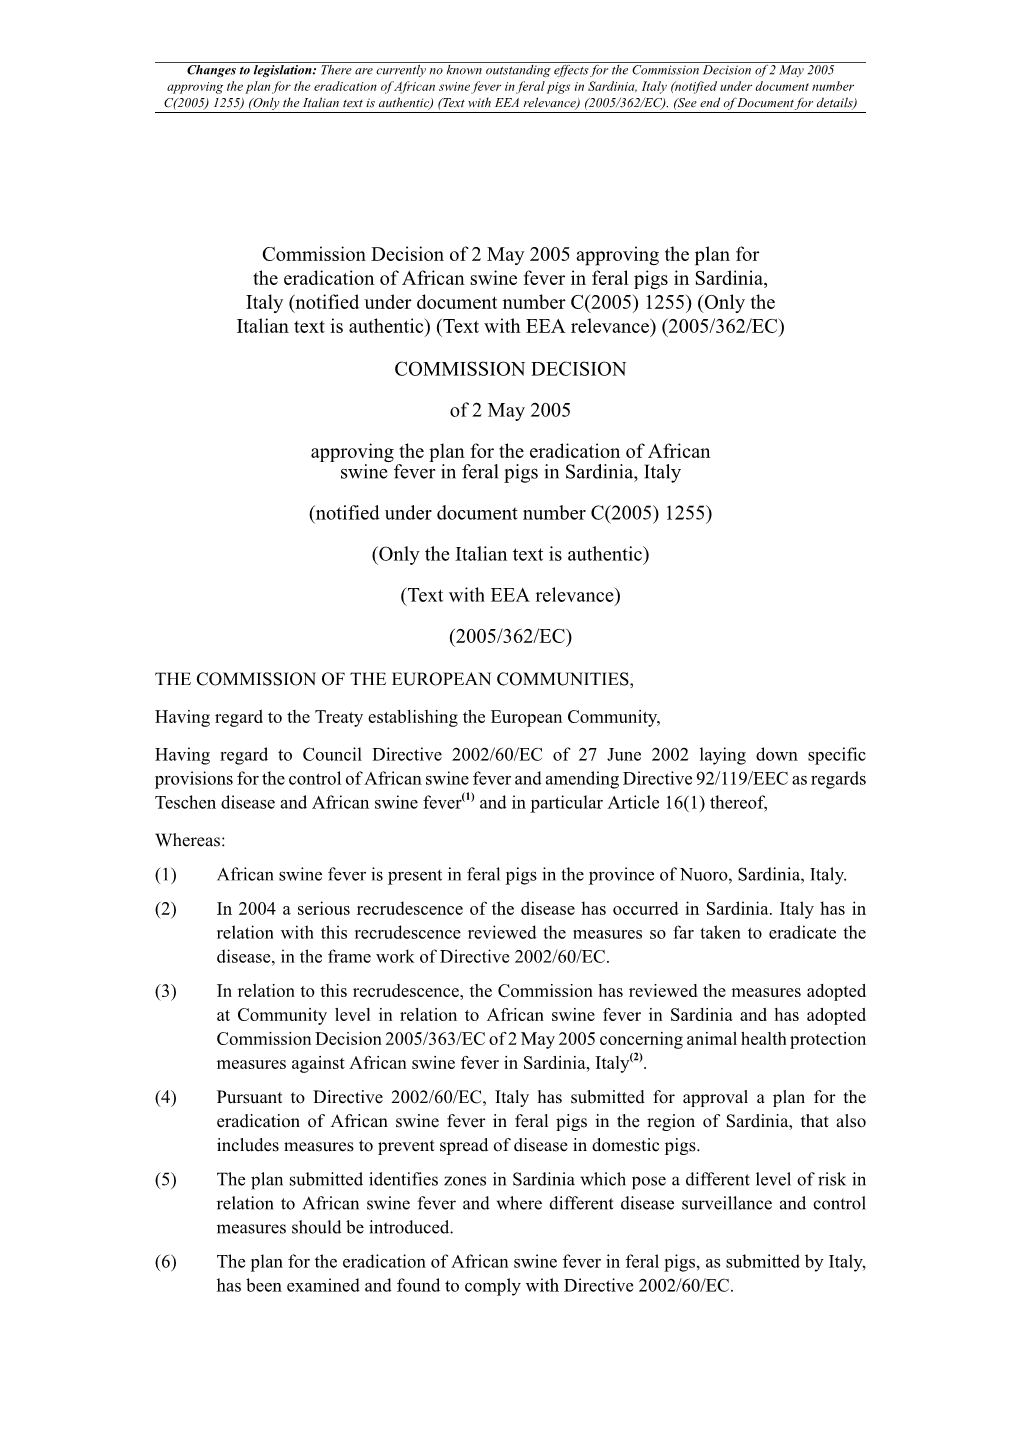 Commission Decision of 2 May 2005 Approving the Plan for The